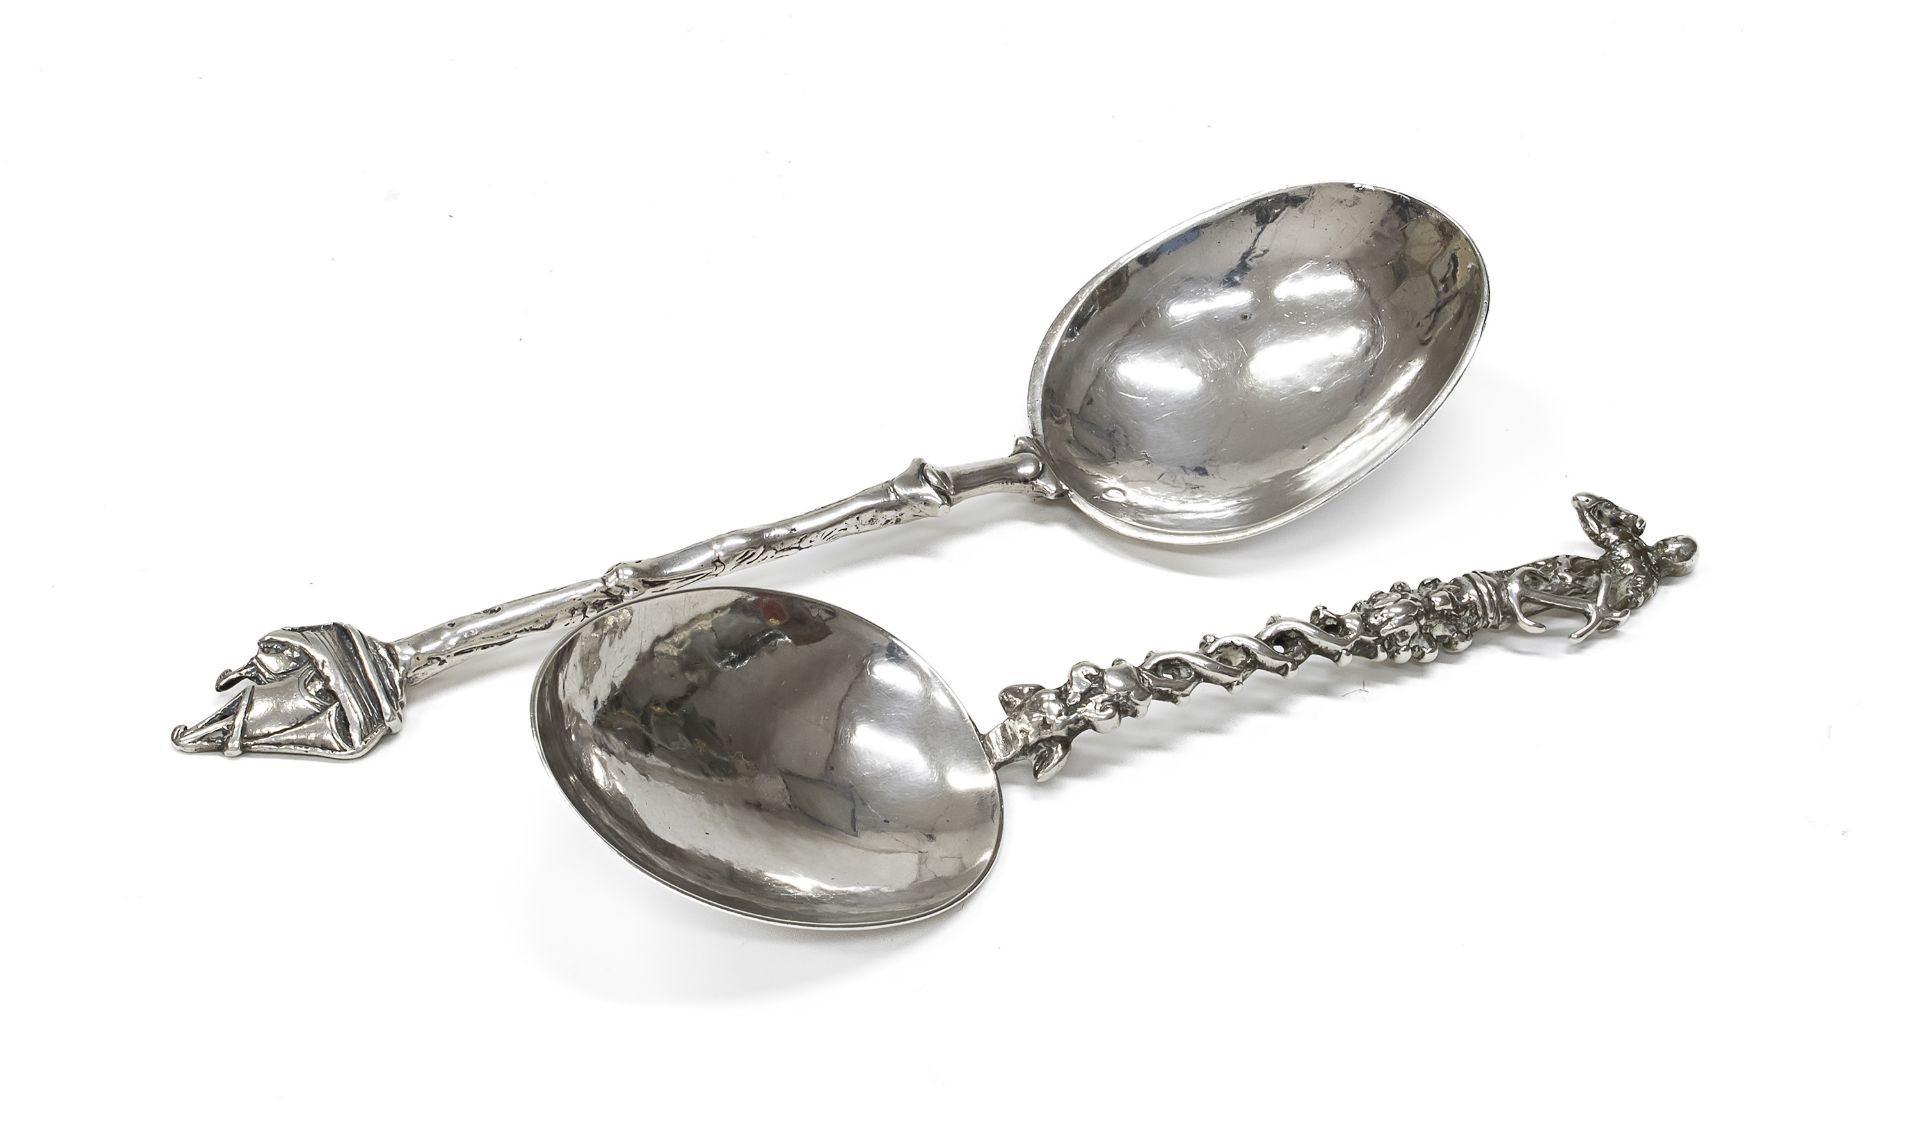 PAIR OF SILVER SPOONS HOLLAND END OF THE 18TH EARLY 19th CENTURY